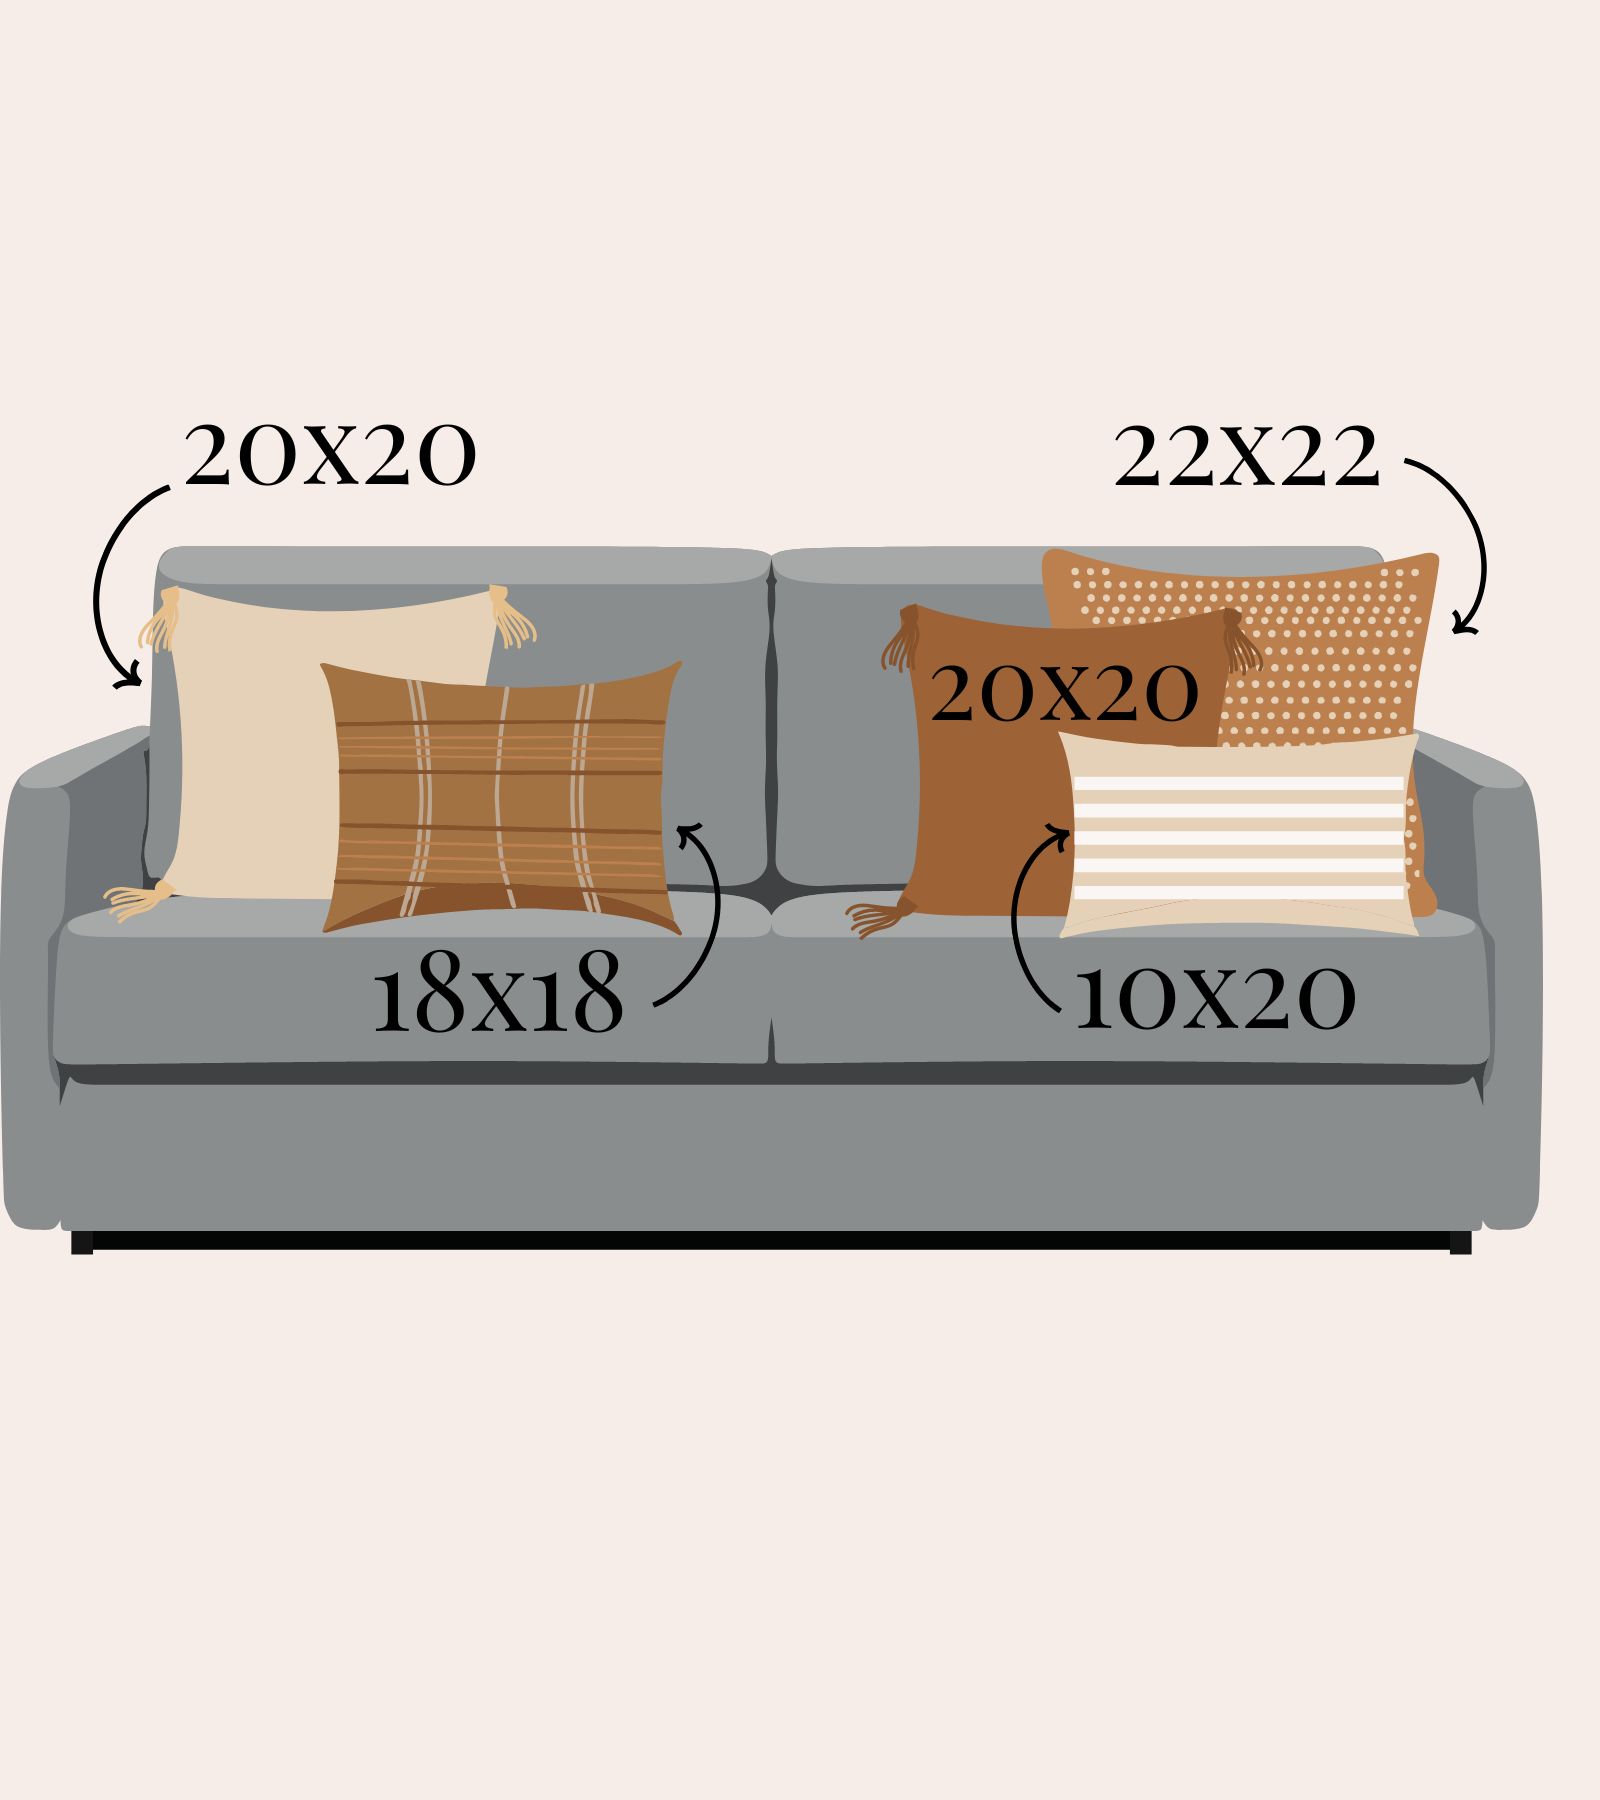 https://homebyalley.com/wp-content/uploads/2023/01/How-many-throw-pillows-for-a-couch-are-needed.jpg